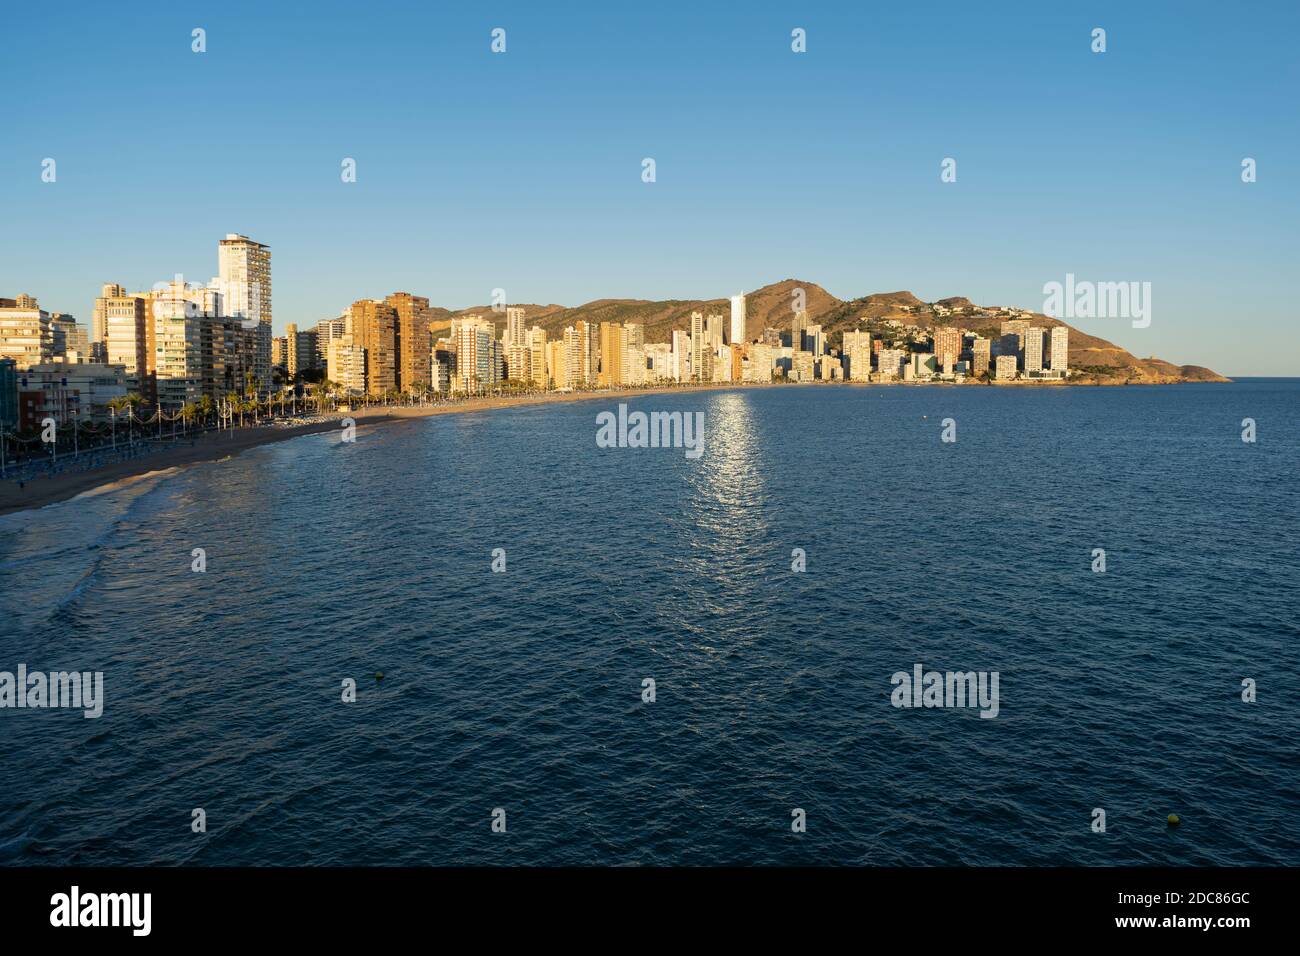 Benidorm , beach panorama and skyline at sunset.Famous vacations destination in Costa Blanca, Spain.Summer holidays background concept. Stock Photo